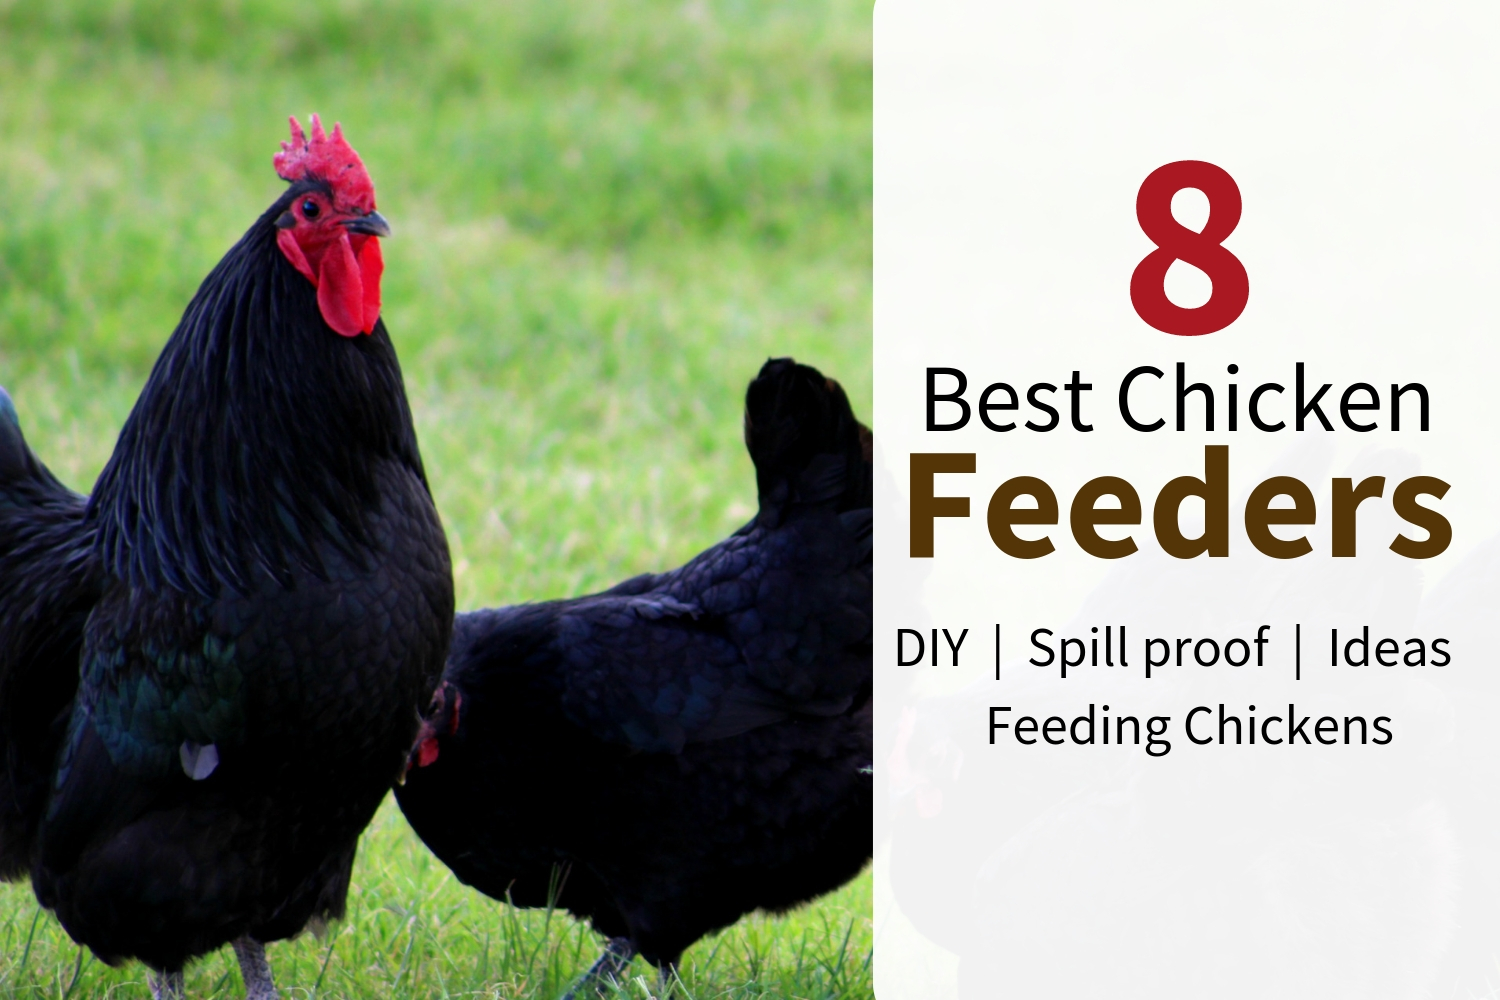 Feeding backyard chickens is always nicer with a custom DIY feeder. Check out these 8 best feeder ideas to build your perfect automatic chicken food feeder today! #backyardchickens #feeders #food